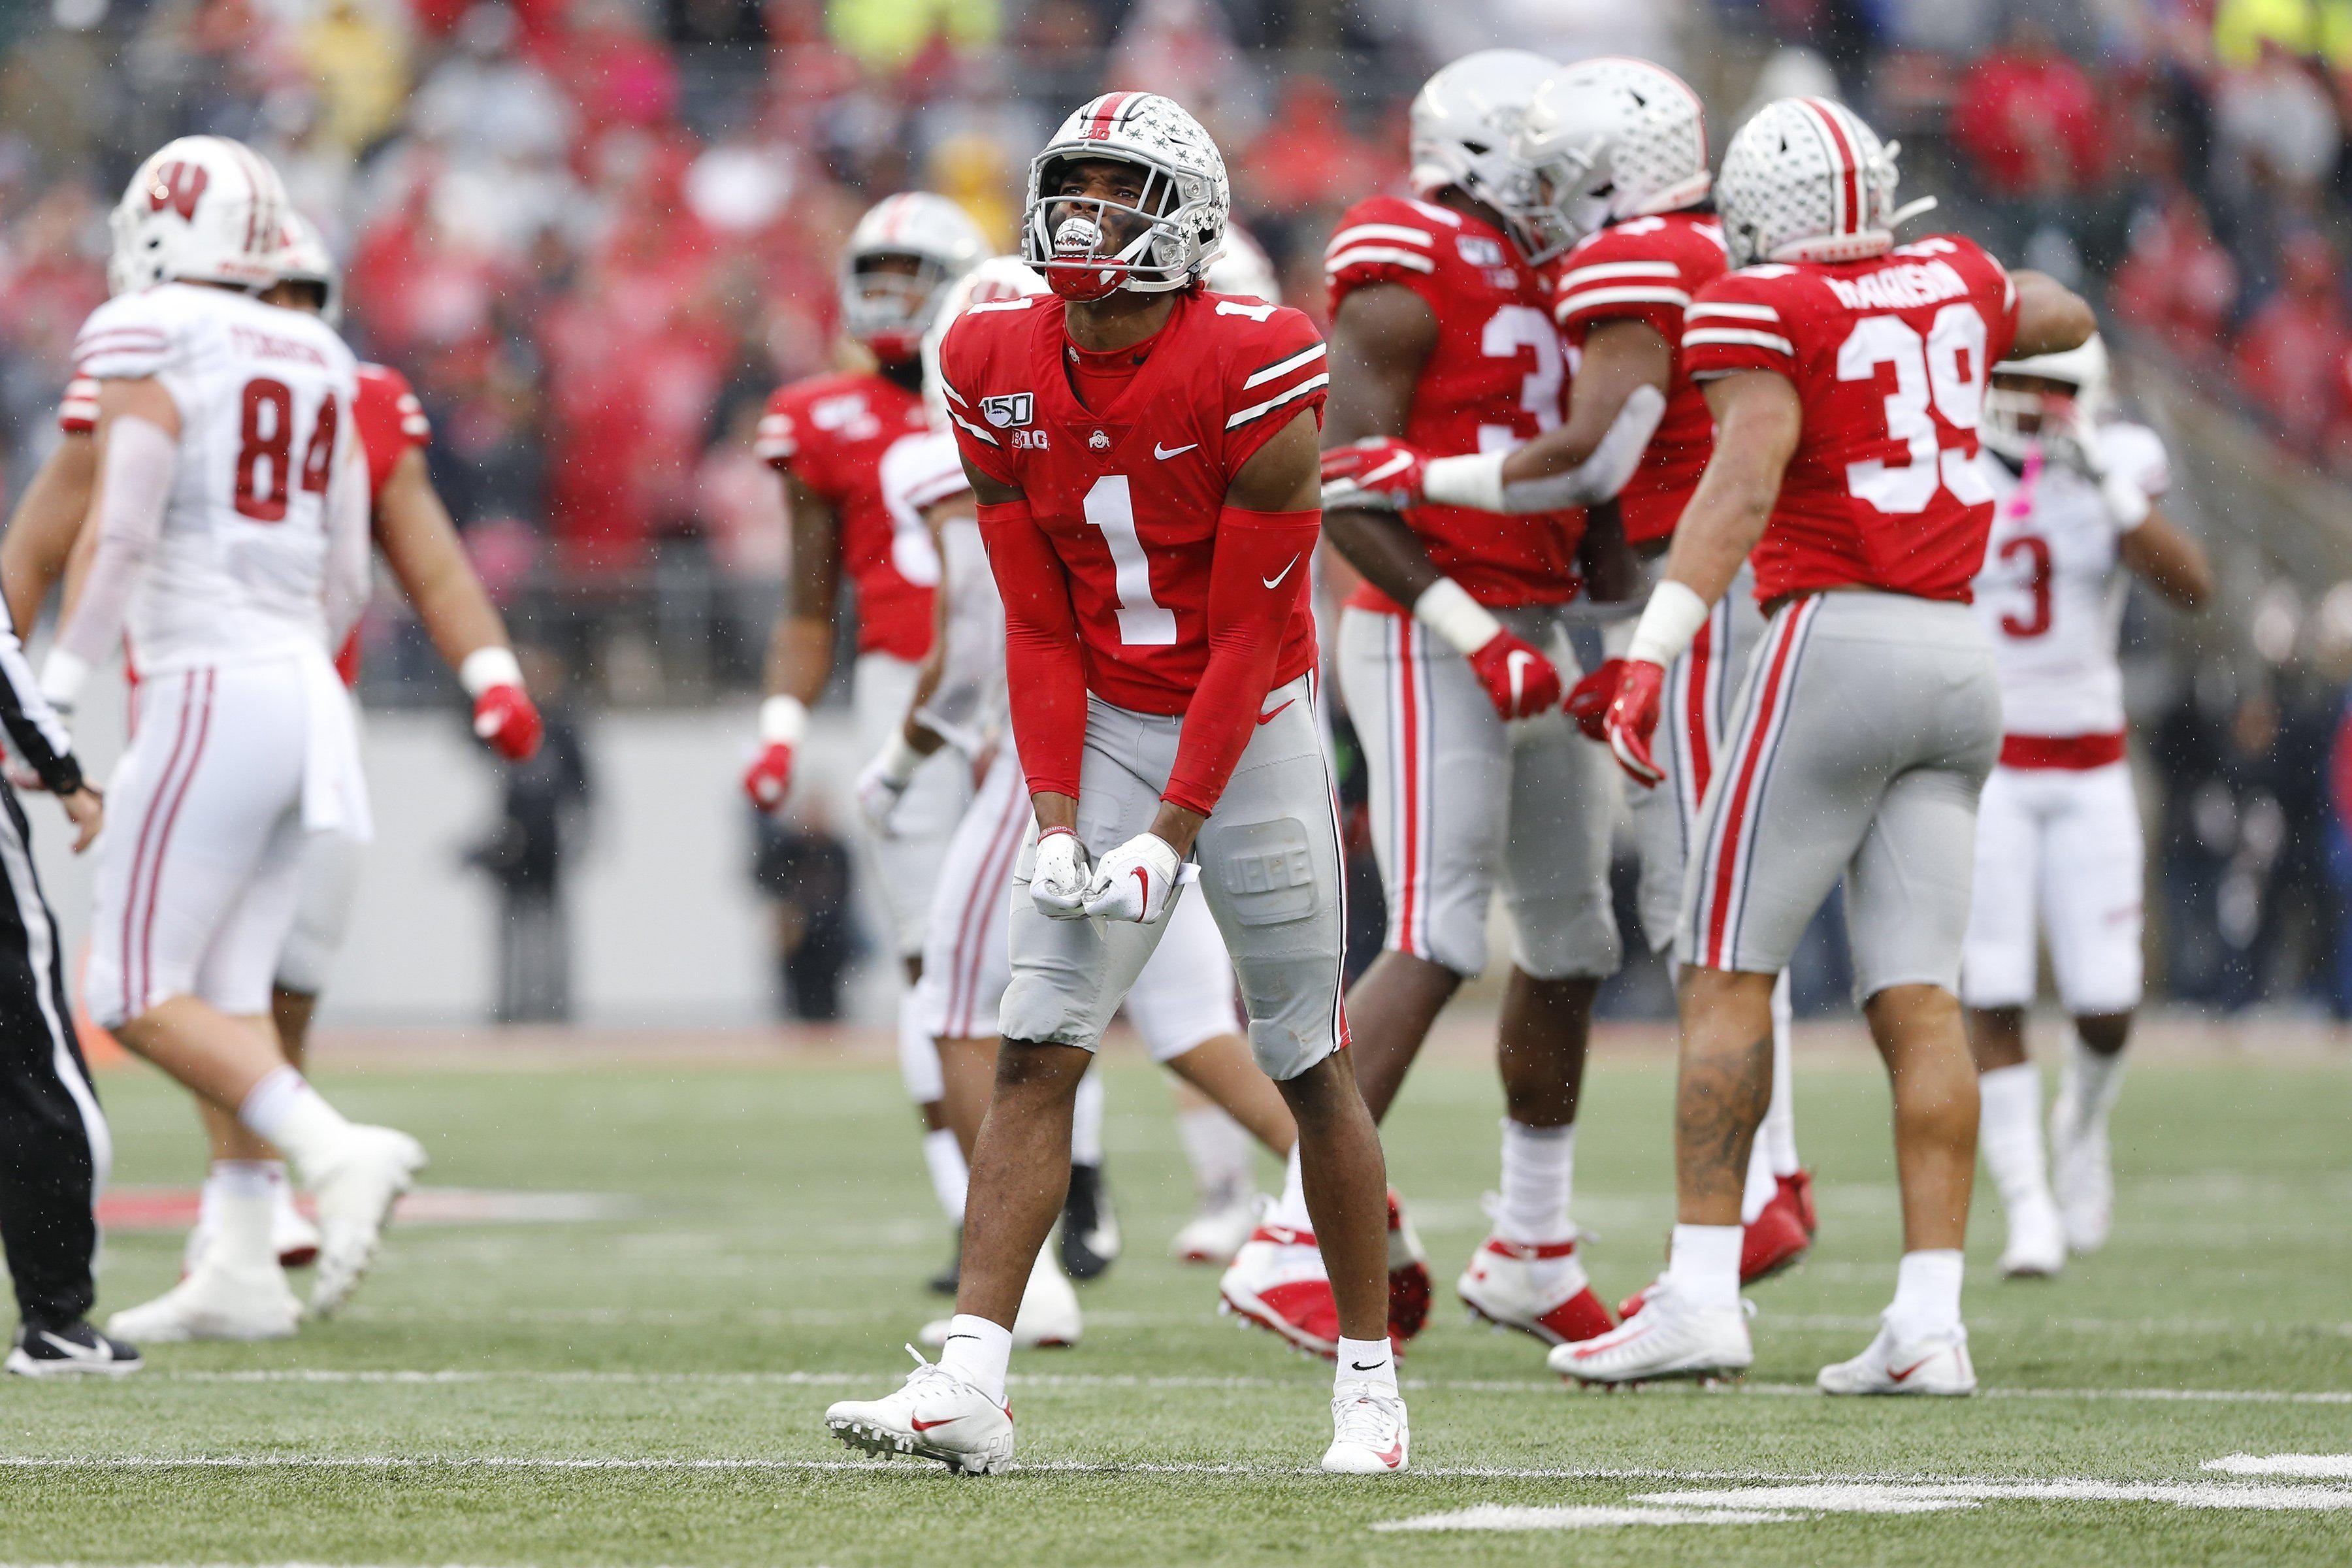 Ohio State Buckeyes cornerback Jeff Okudah celebrates a third down stop during the second quarter of the NCAA football game against the Wisconsin Badgers.